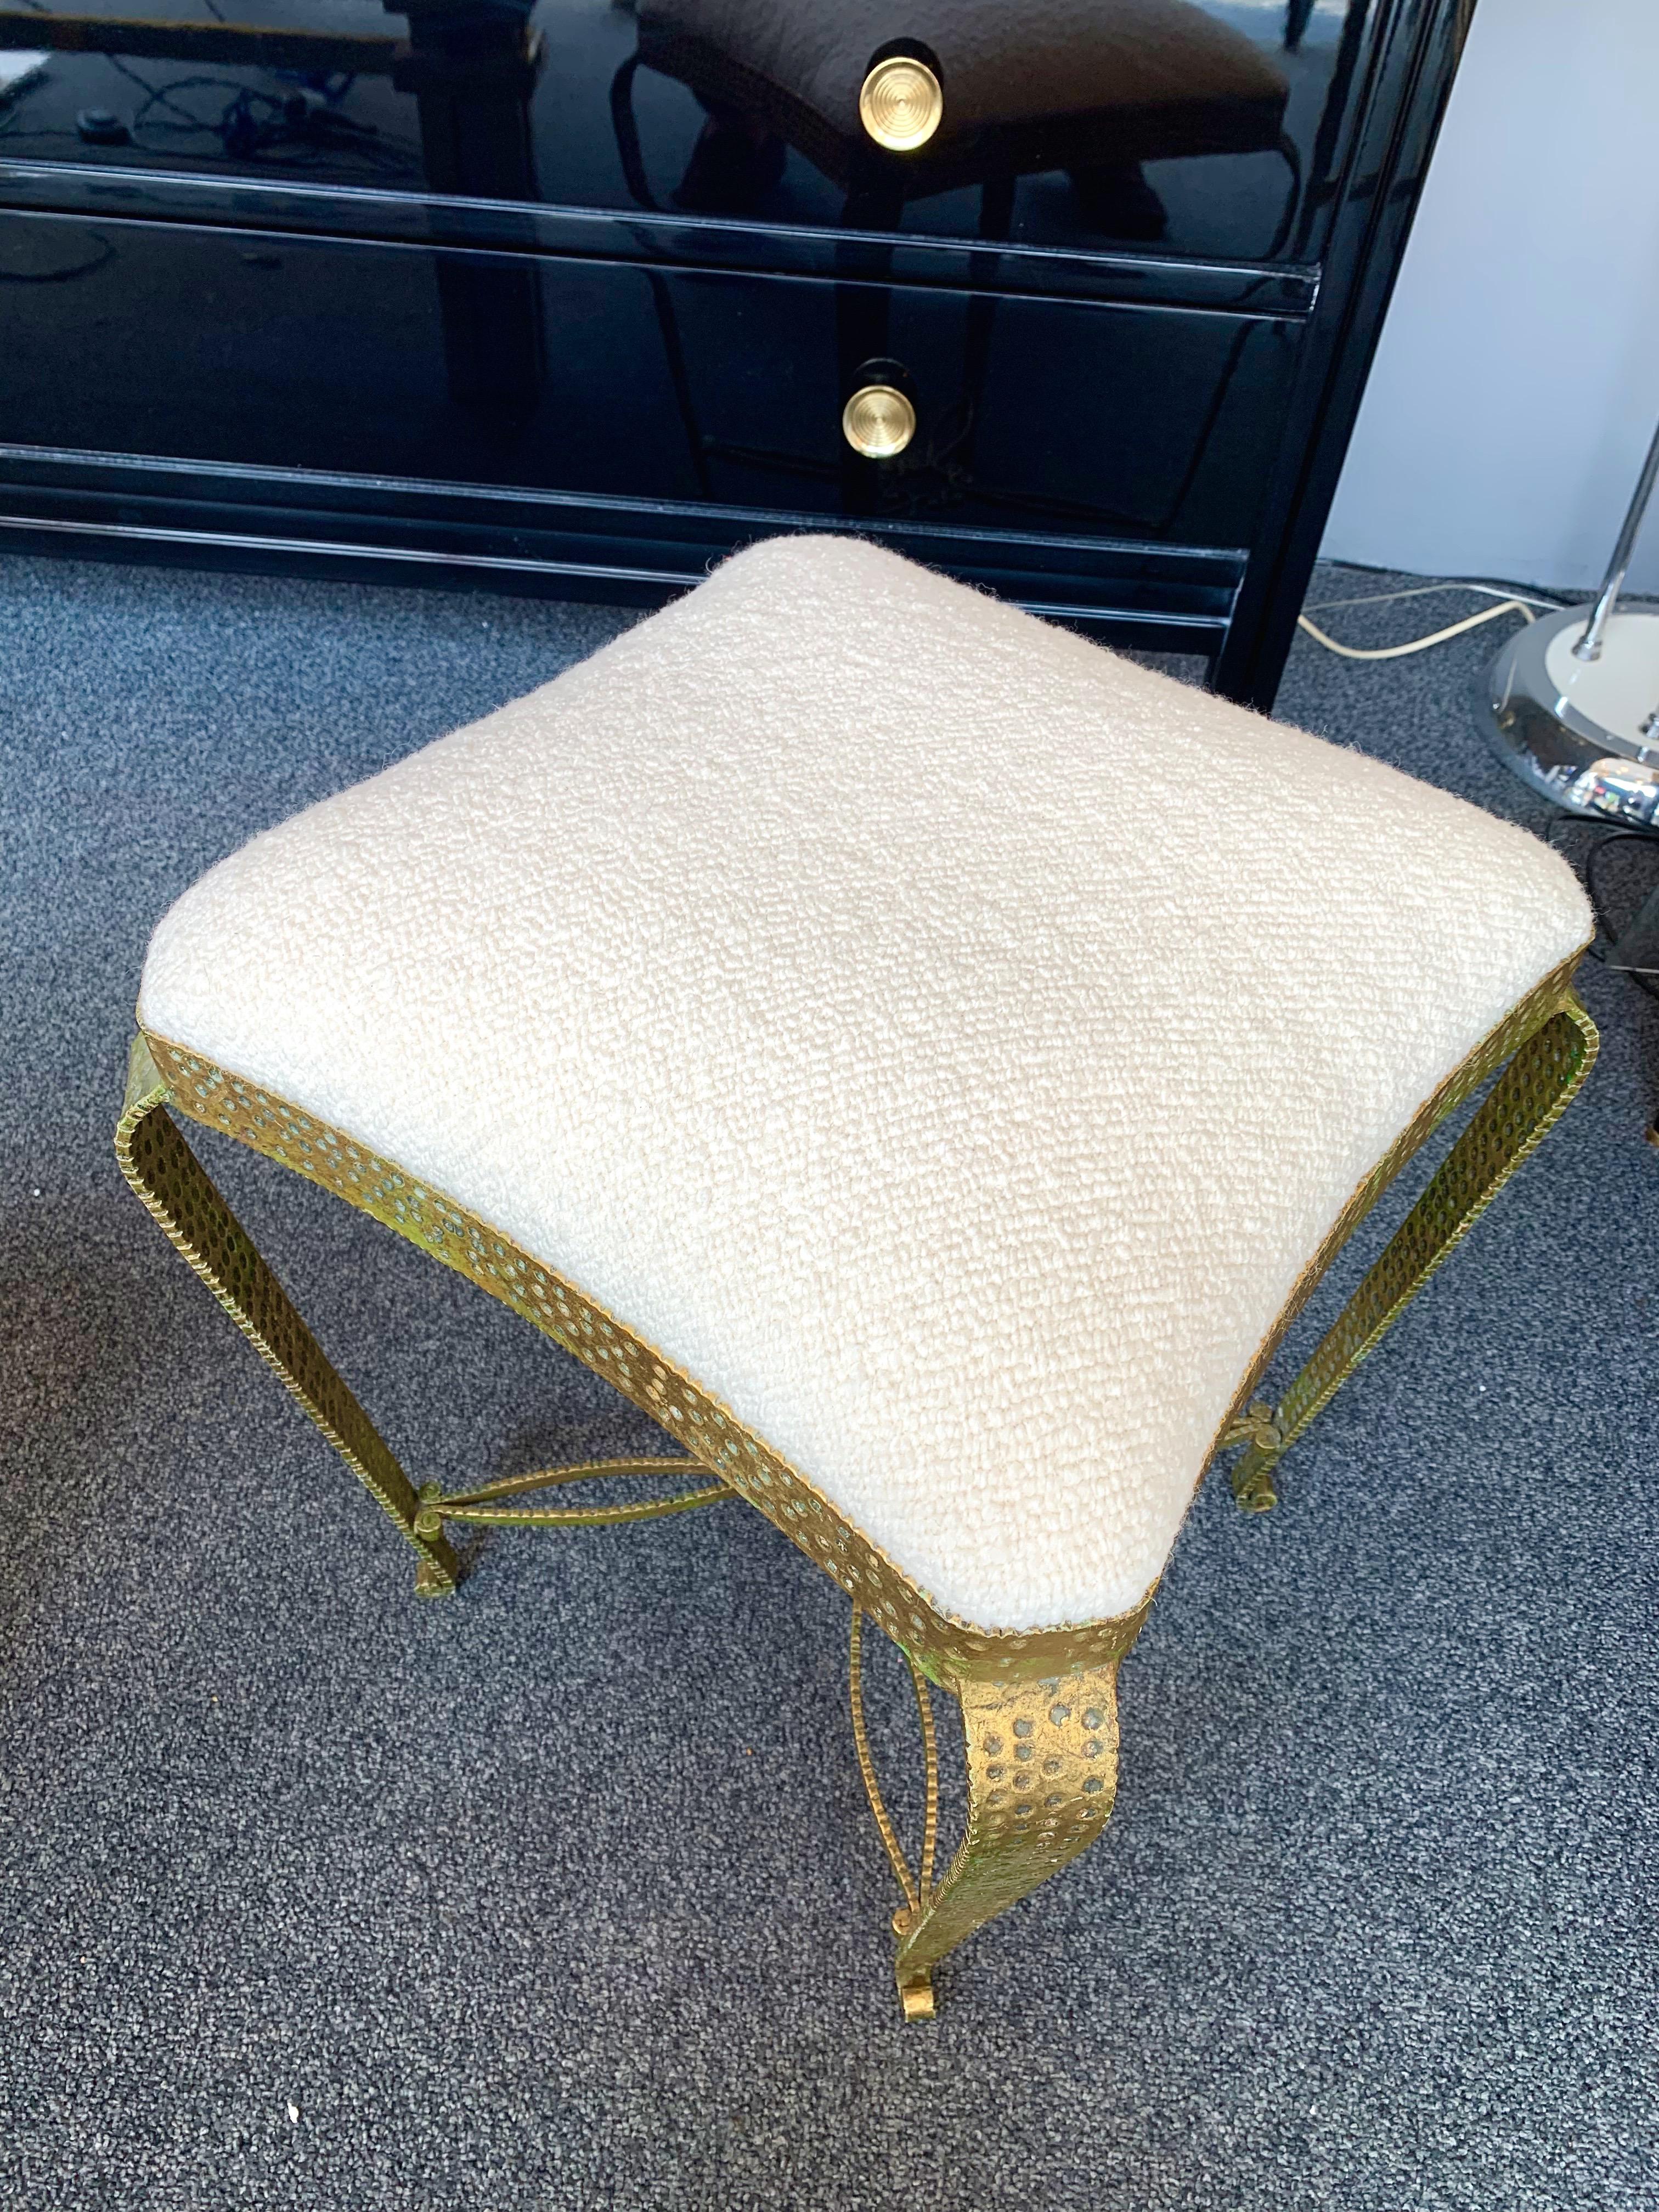 Pair of stools, poufs or ottomans by Pier Luigi Colli. Hammered wrought iron and gold leaf. Fully upholstered with Judith fabric by Pierre Frey. A bench and console table are available on my storefront. Famous design like Maison Jansen, Bagues,